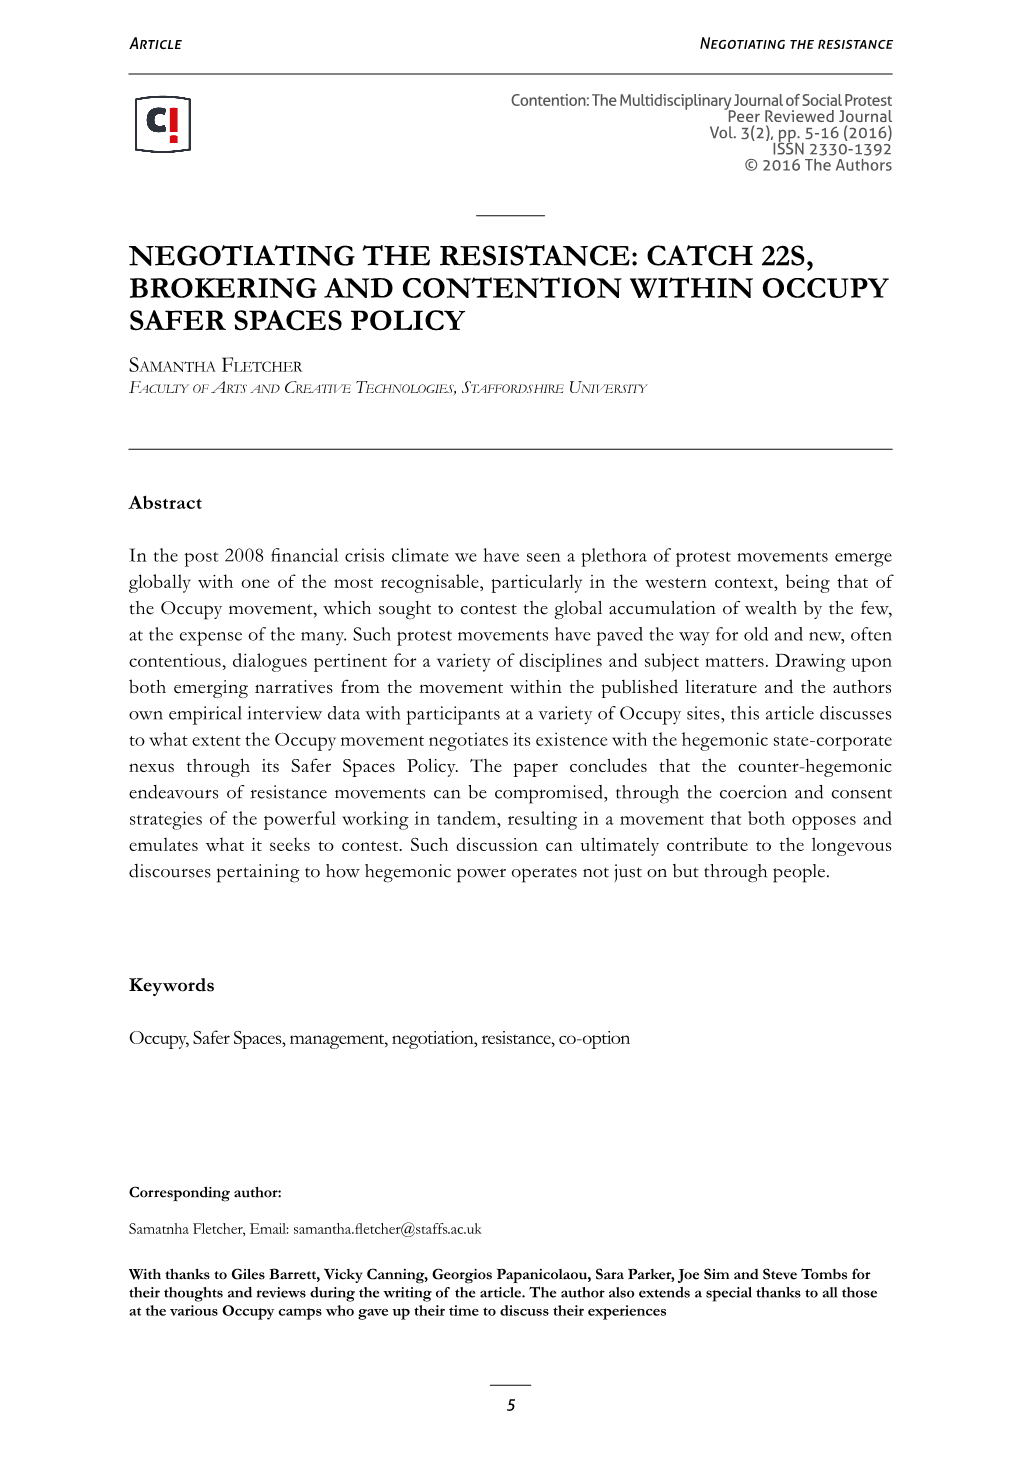 Negotiating the Resistance: Catch 22S, Brokering and Contention Within Occupy Safer Spaces Policy